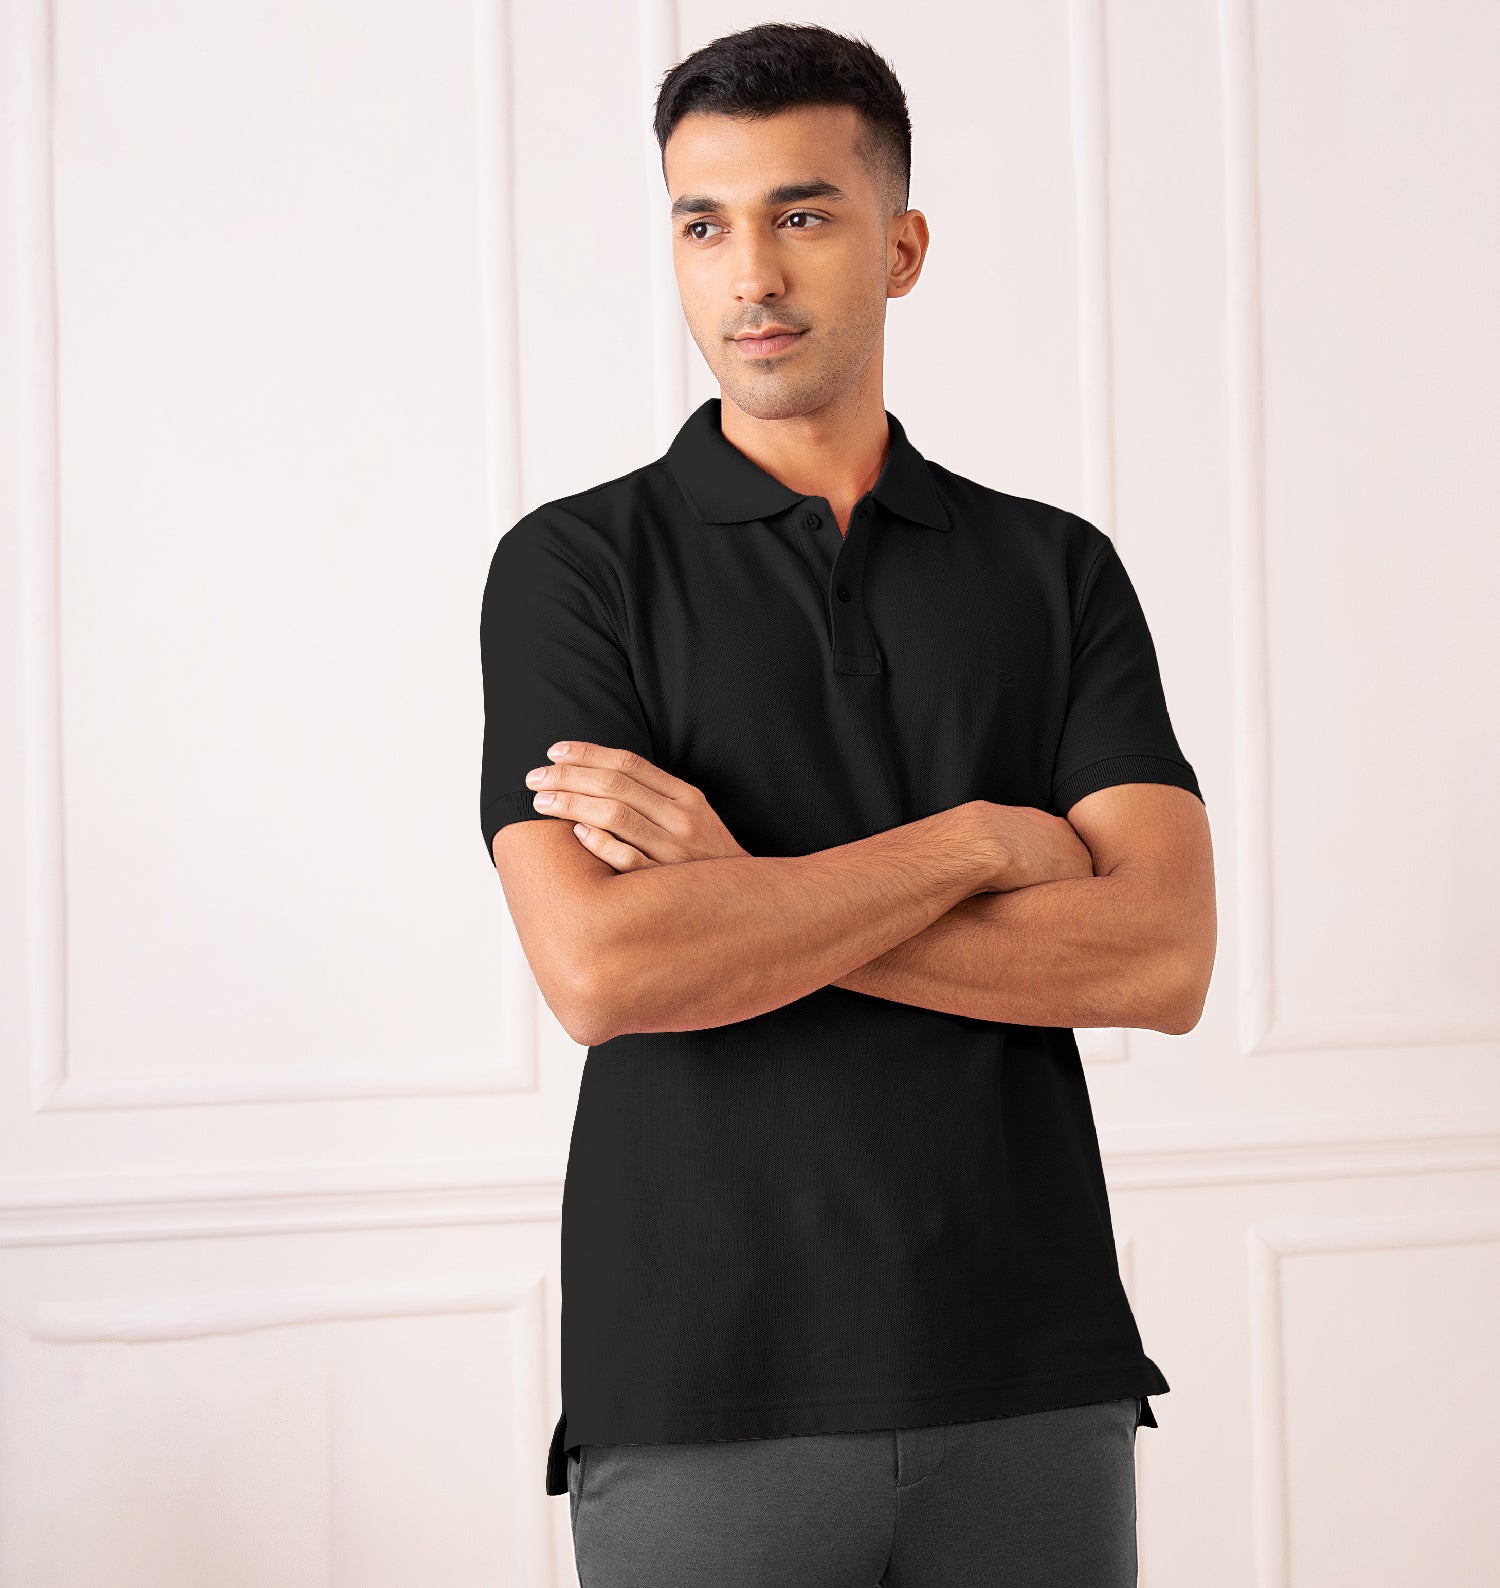 Tips To Style Black Polo T-Shirts For All Occasions